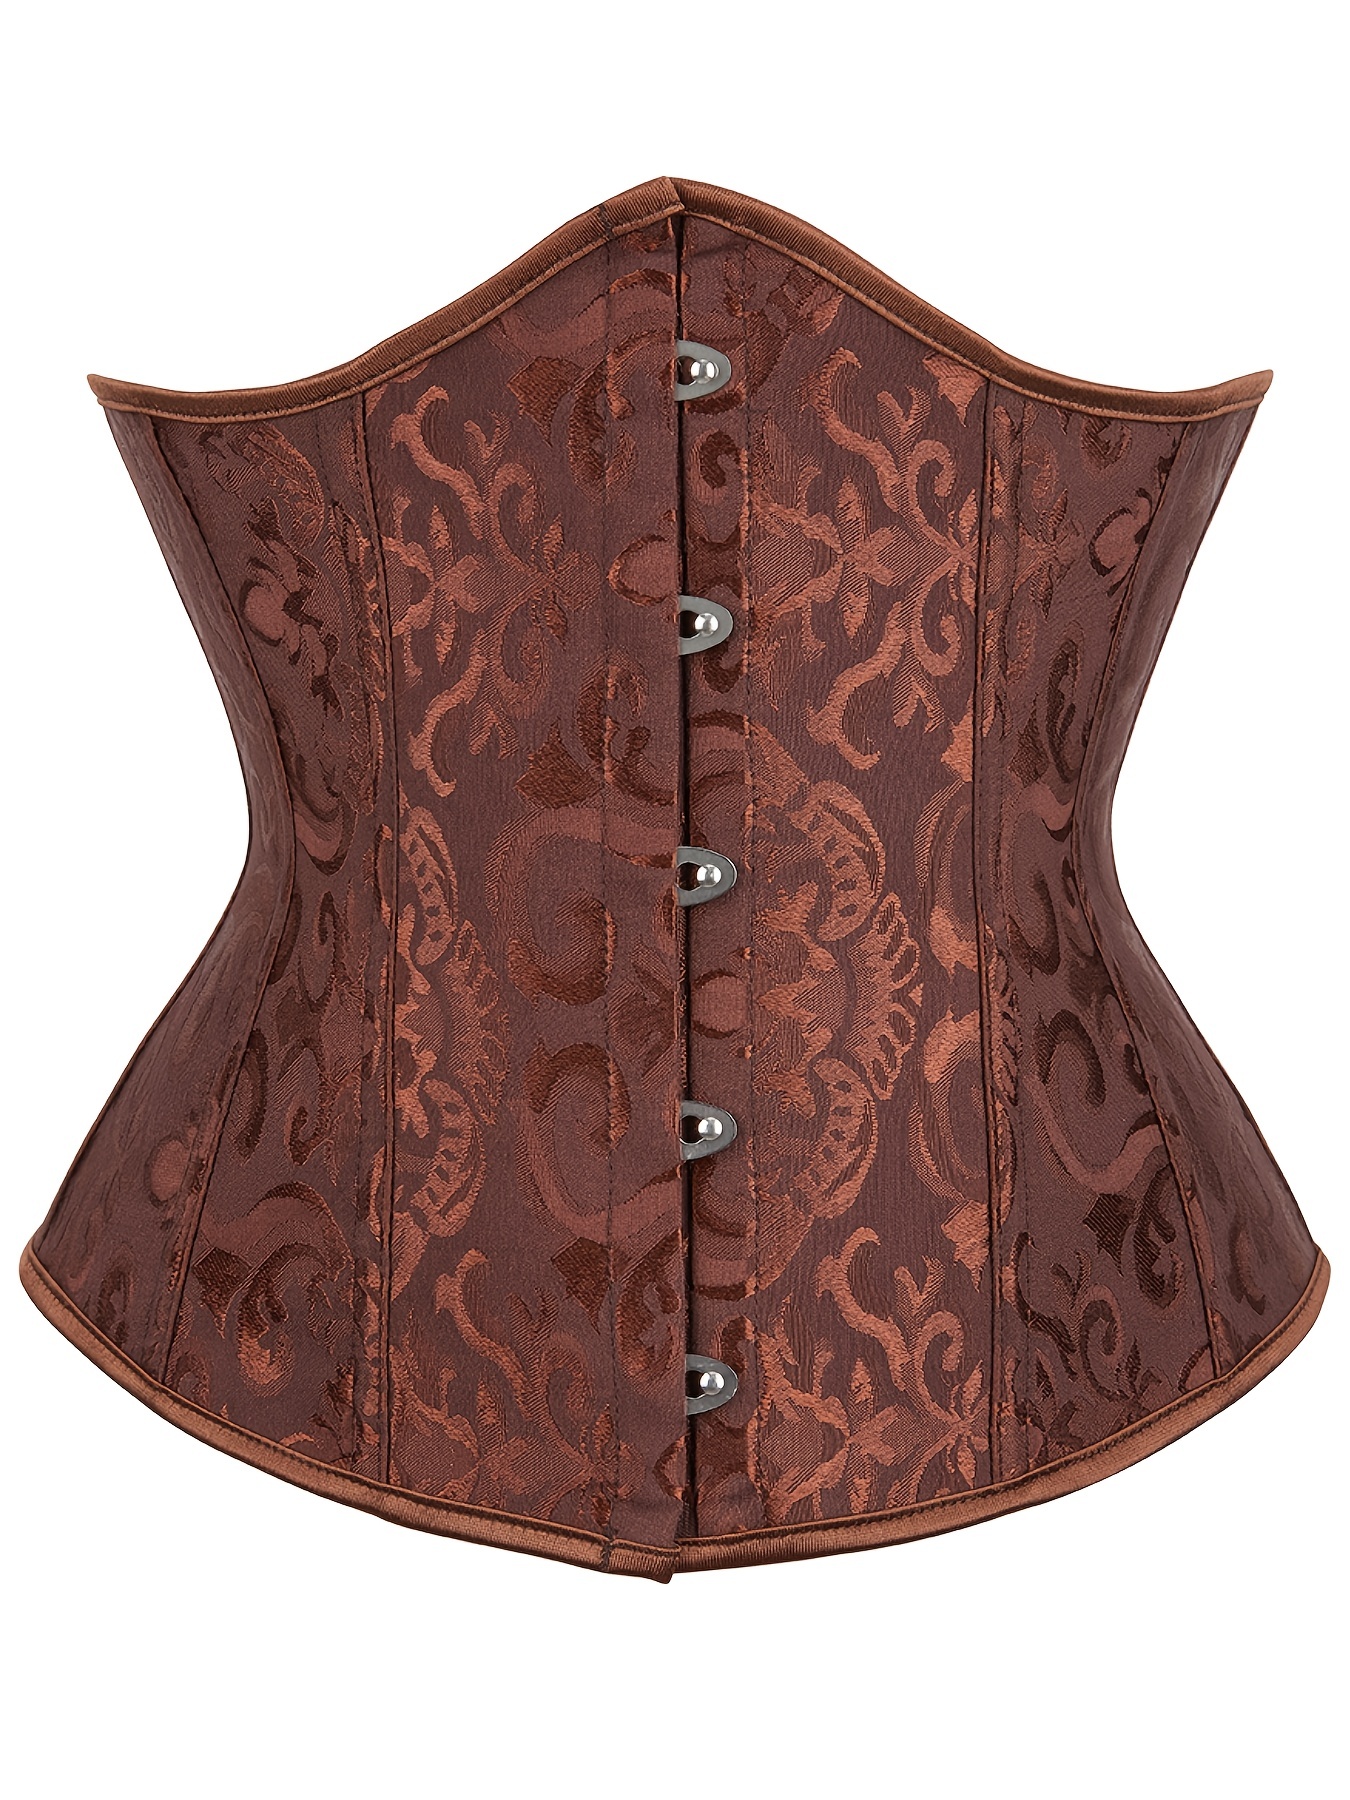 Buy WorldCare® Shapers Bod Women Body Shaper Trainer European Palace Corset  Gothic Steampunk Corset Slimming Underwear Shapewear Color Brown Size  S26389